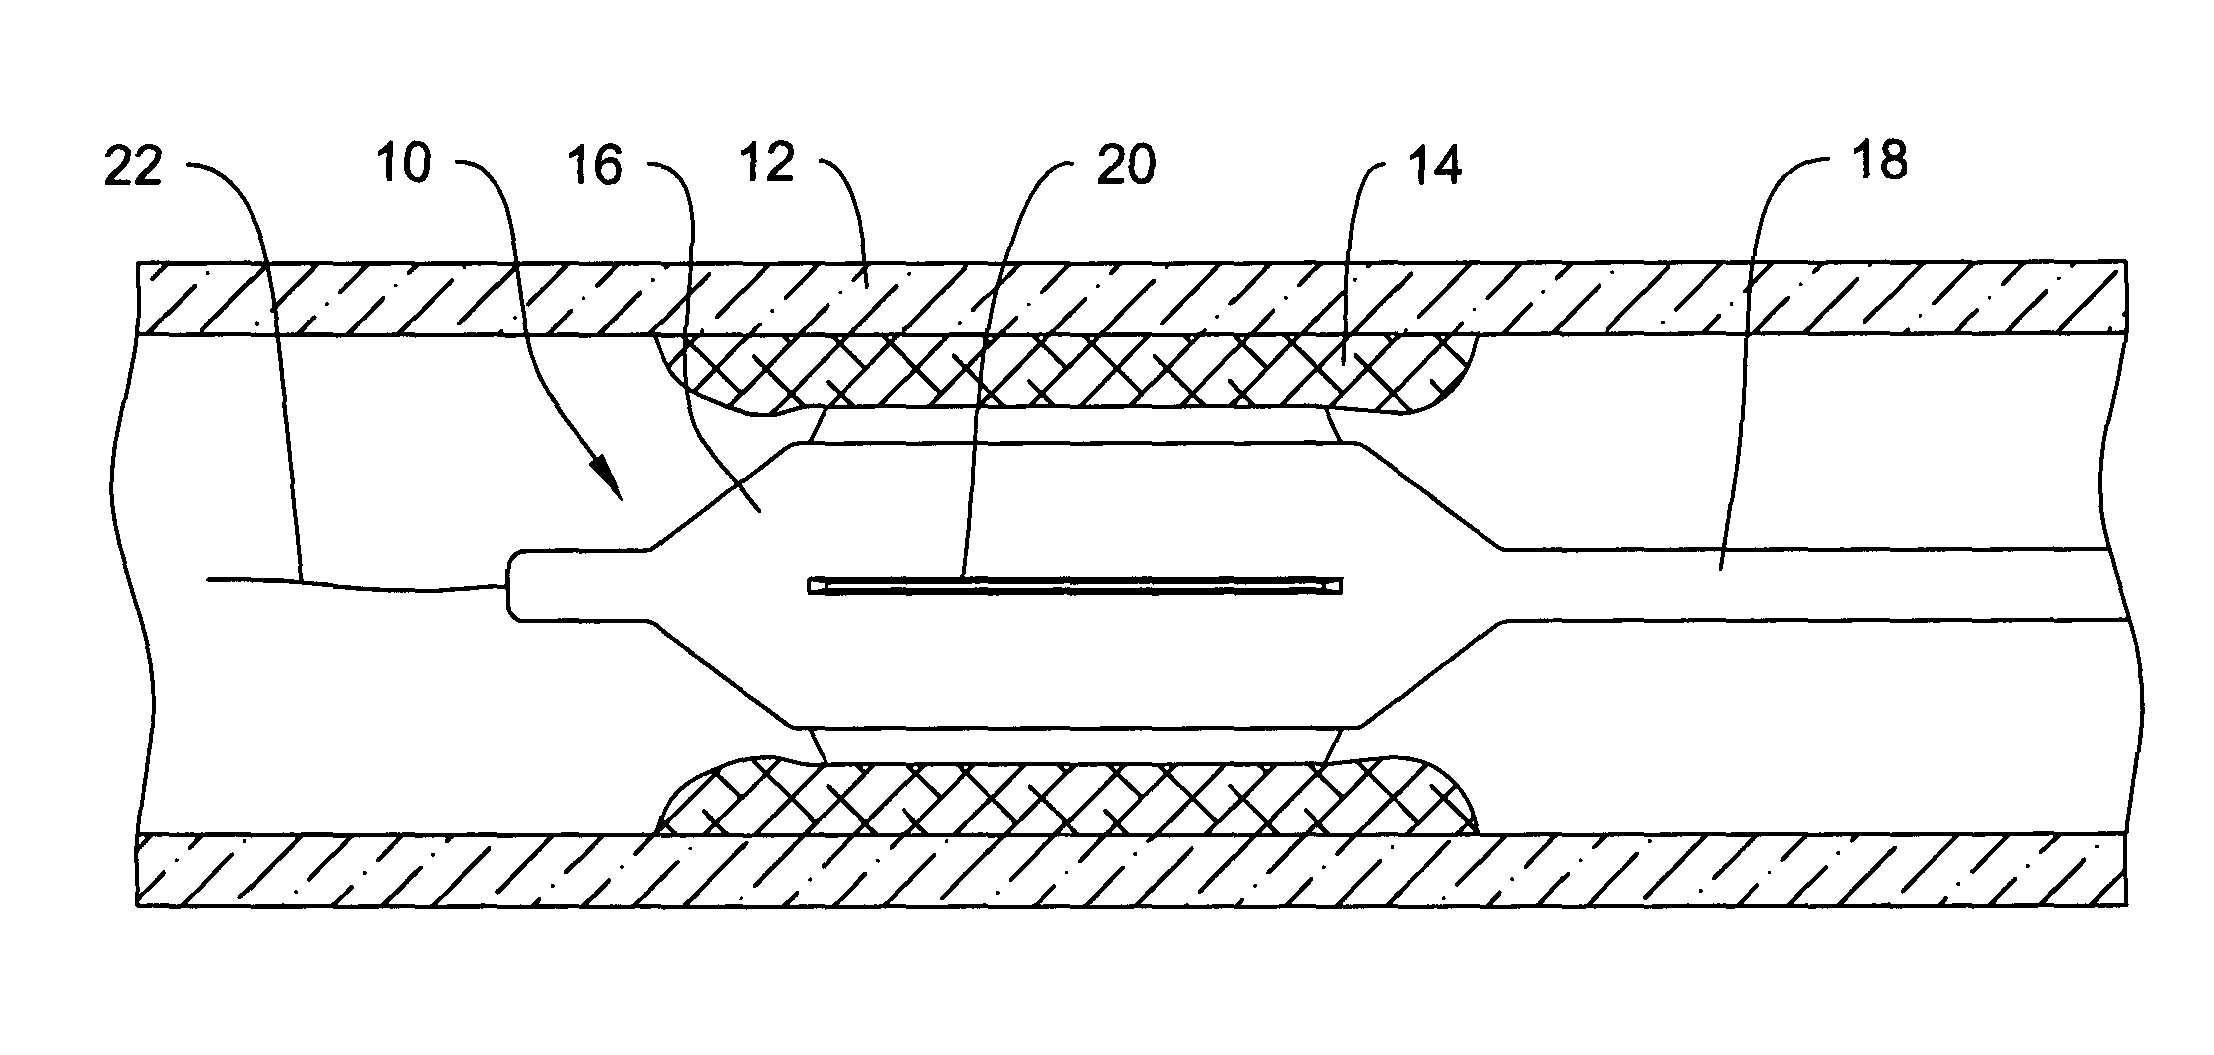 Catheter having a cutting balloon including multiple cavities or multiple channels